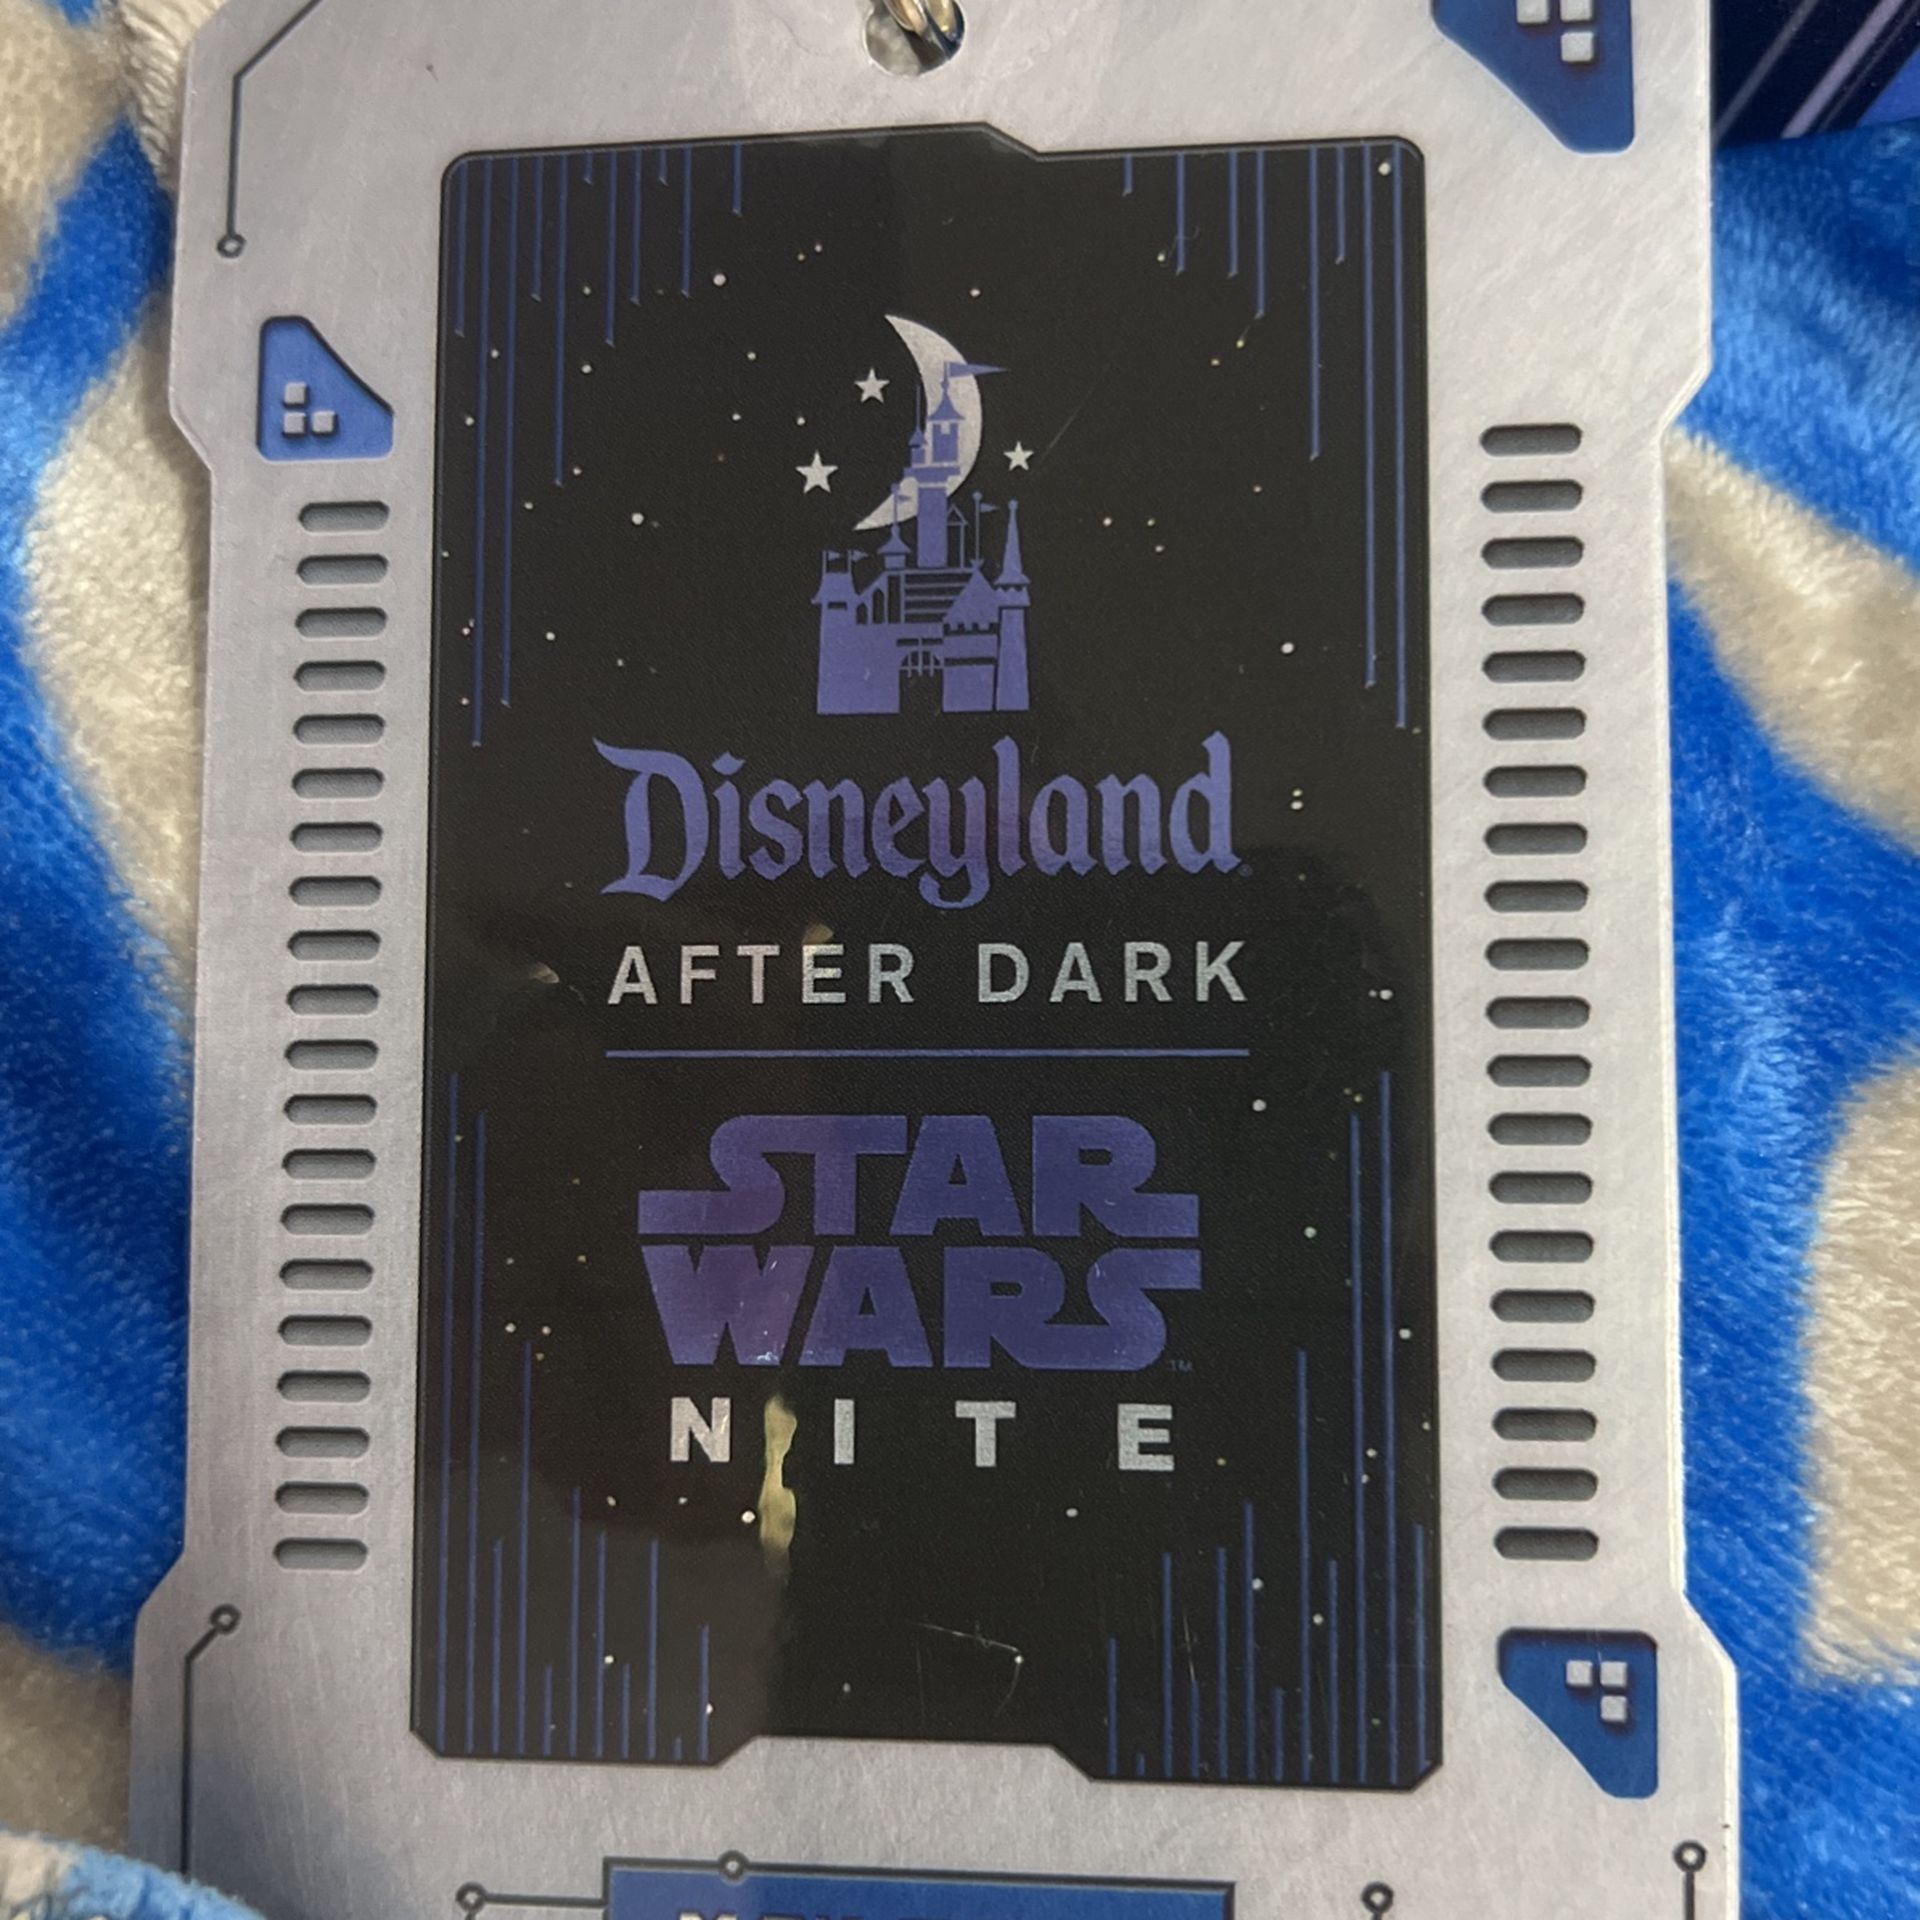 Two Star Wars Night In Disneyland For 4/23